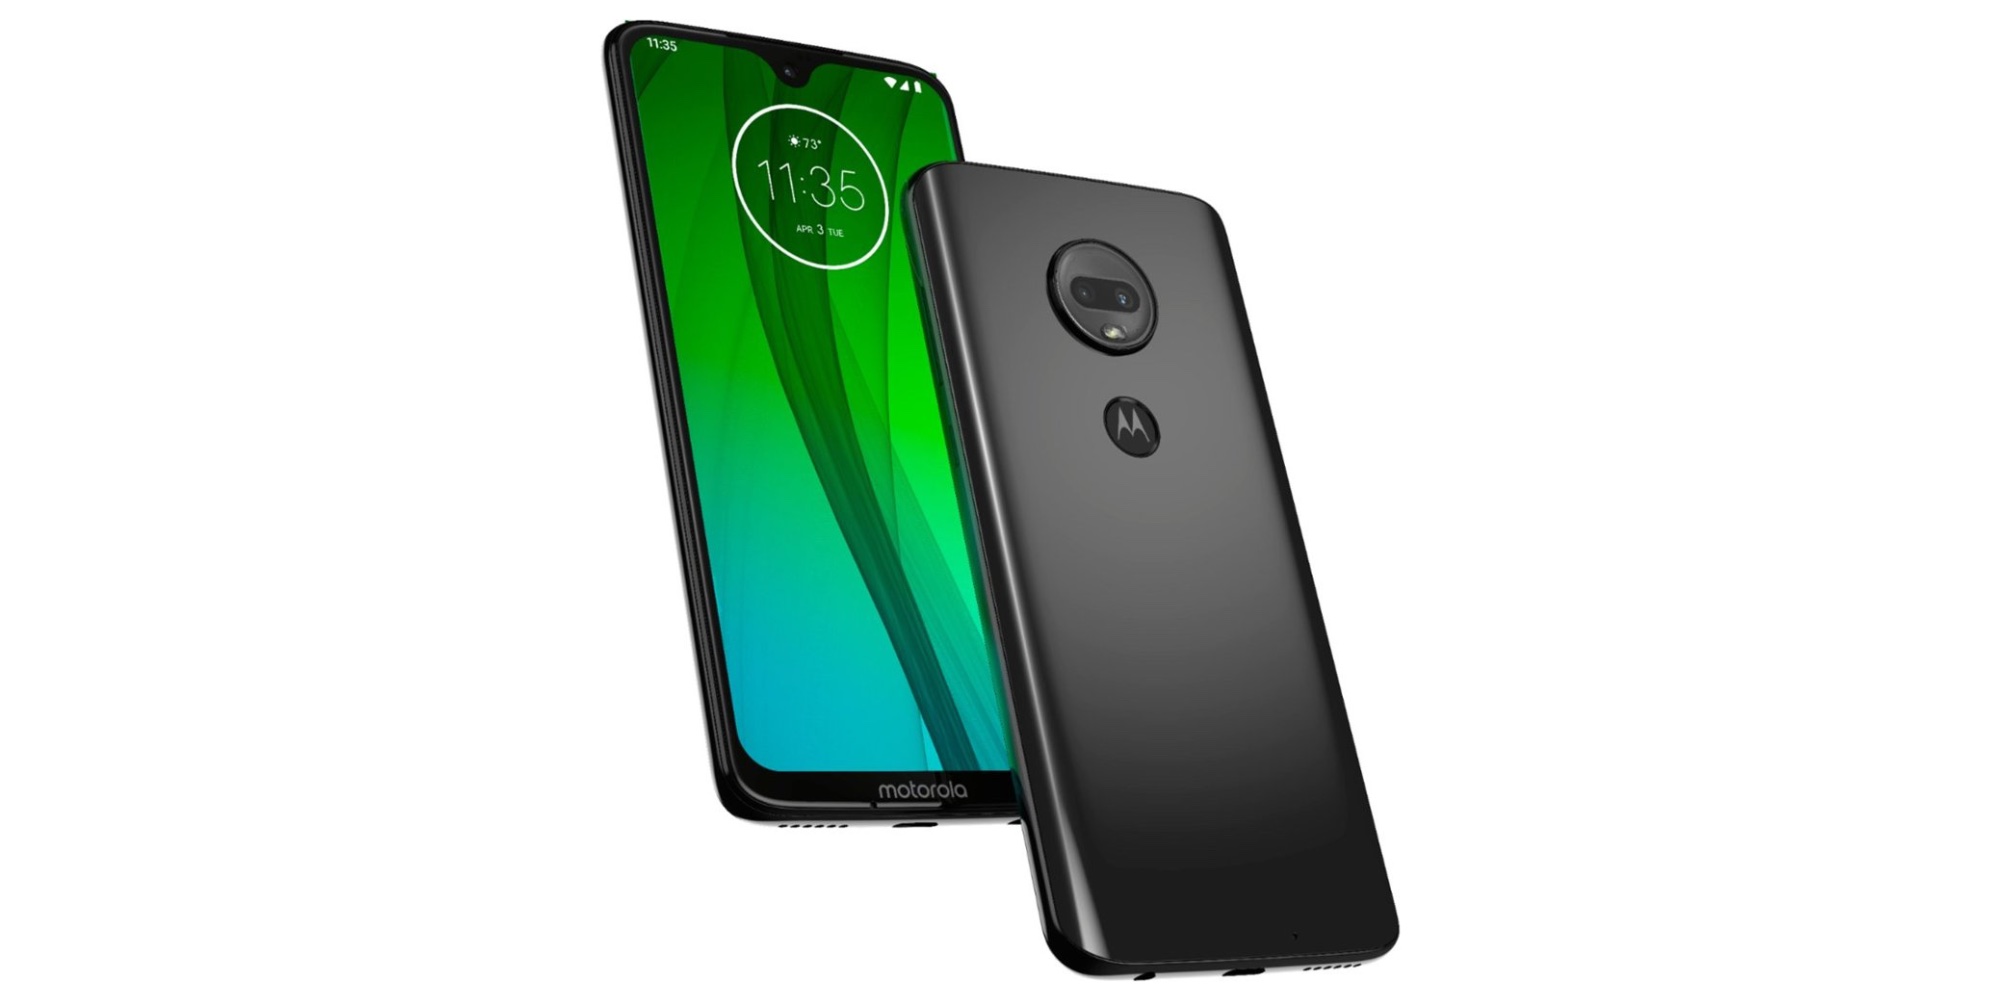 Save 33 on Motorola's Moto G7 Android Smartphone at a